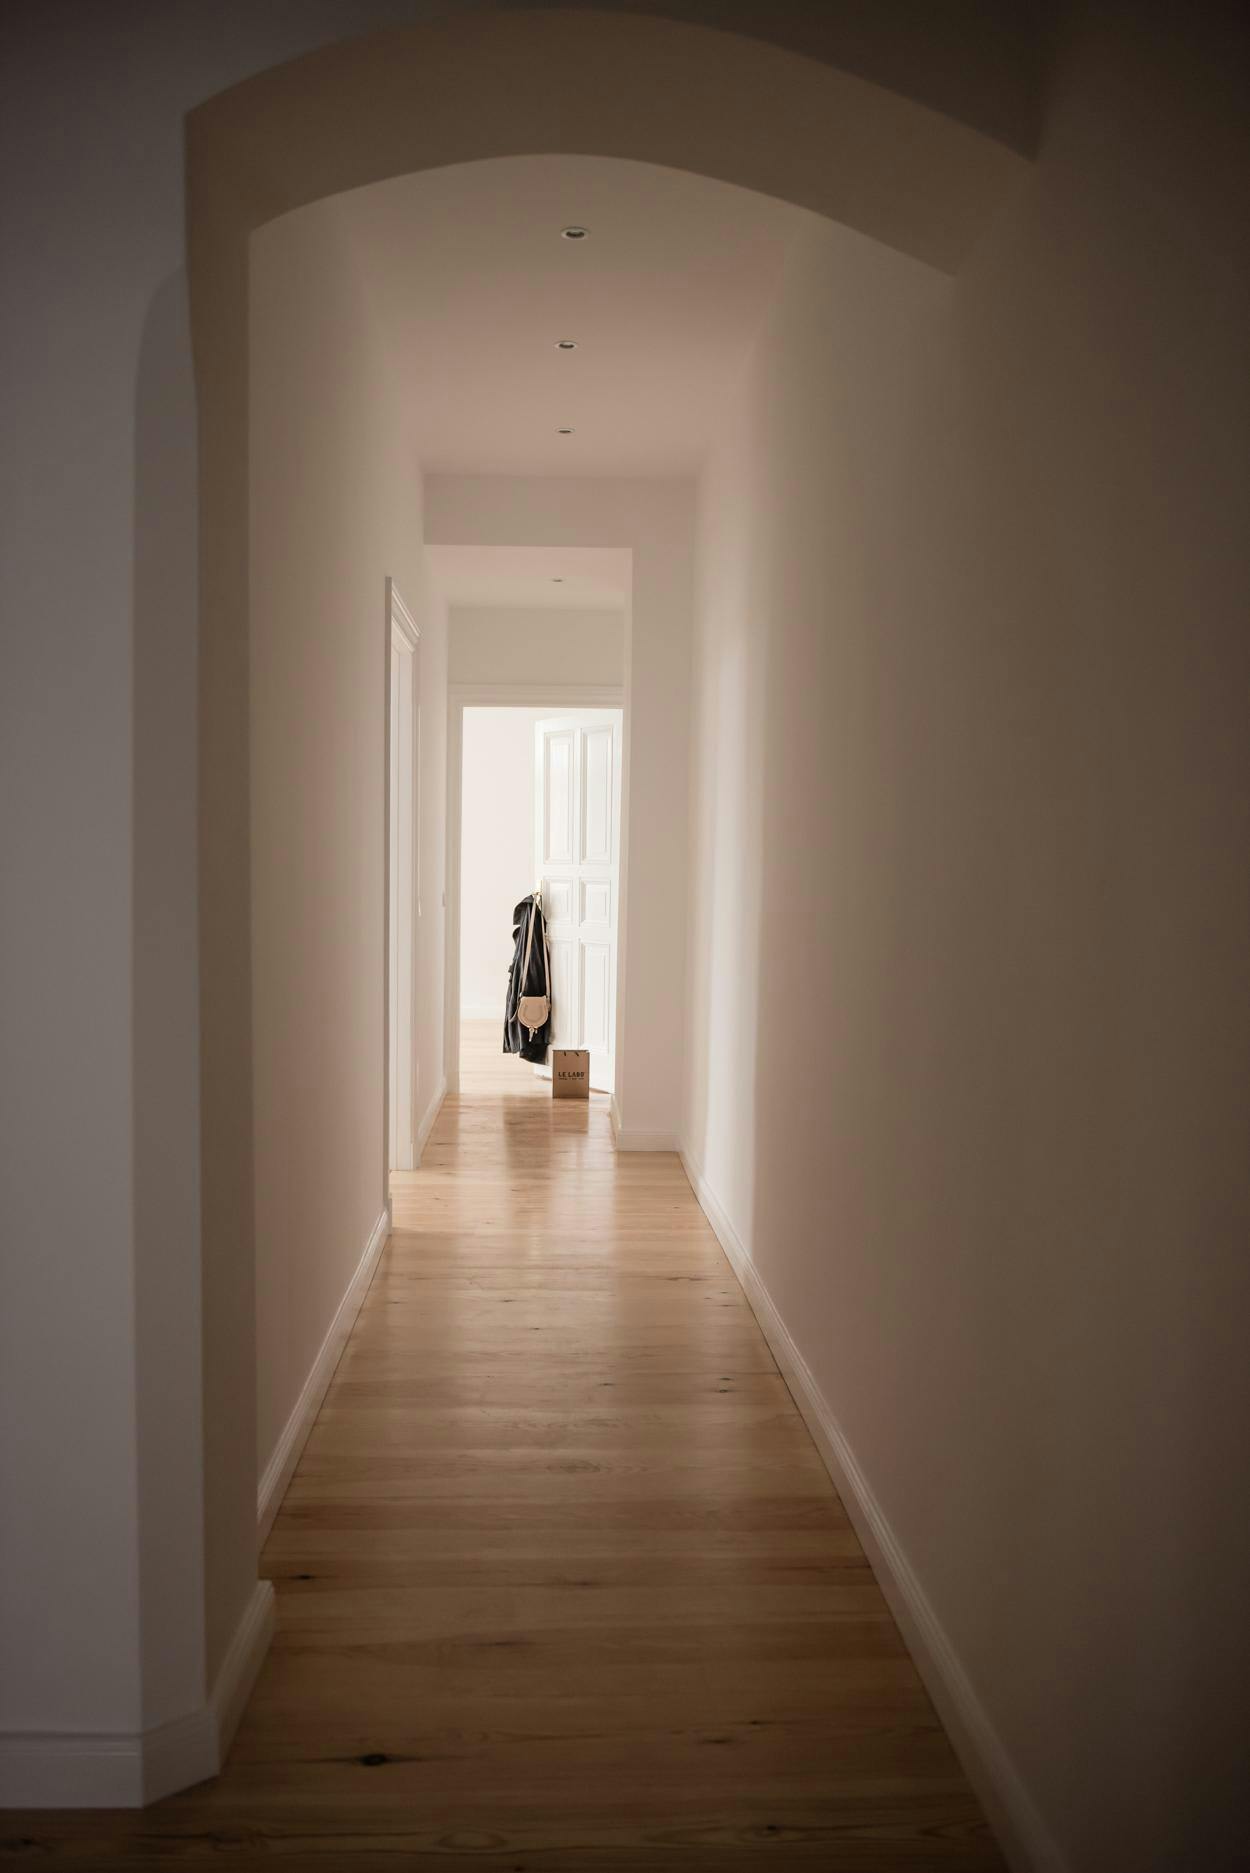 The image shows a long, narrow hallway with a wooden floor. The hallway is empty, with no people or objects visible. The lighting in the hallway is dim, creating a somewhat eerie atmosphere. The wooden floor extends from one end of the hallway to the other, and the walls are painted white. The hallway appears to be empty and quiet, making it a suitable setting for a movie or a quiet moment.